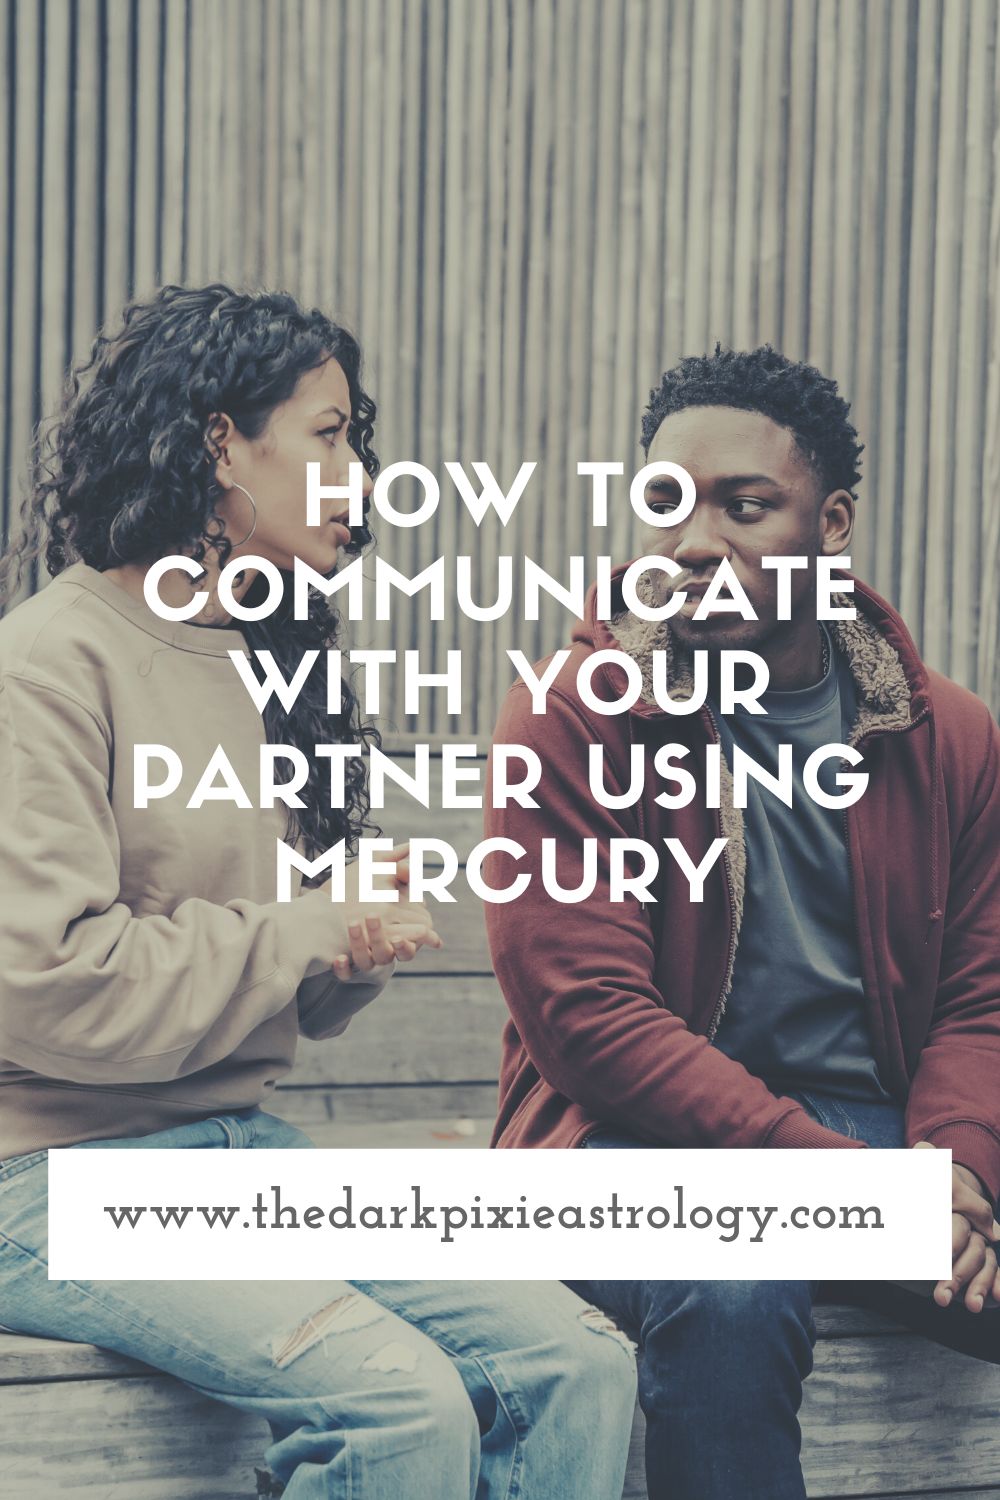 How to Communicate With Your Partner Using Mercury - The Dark Pixie Astrology